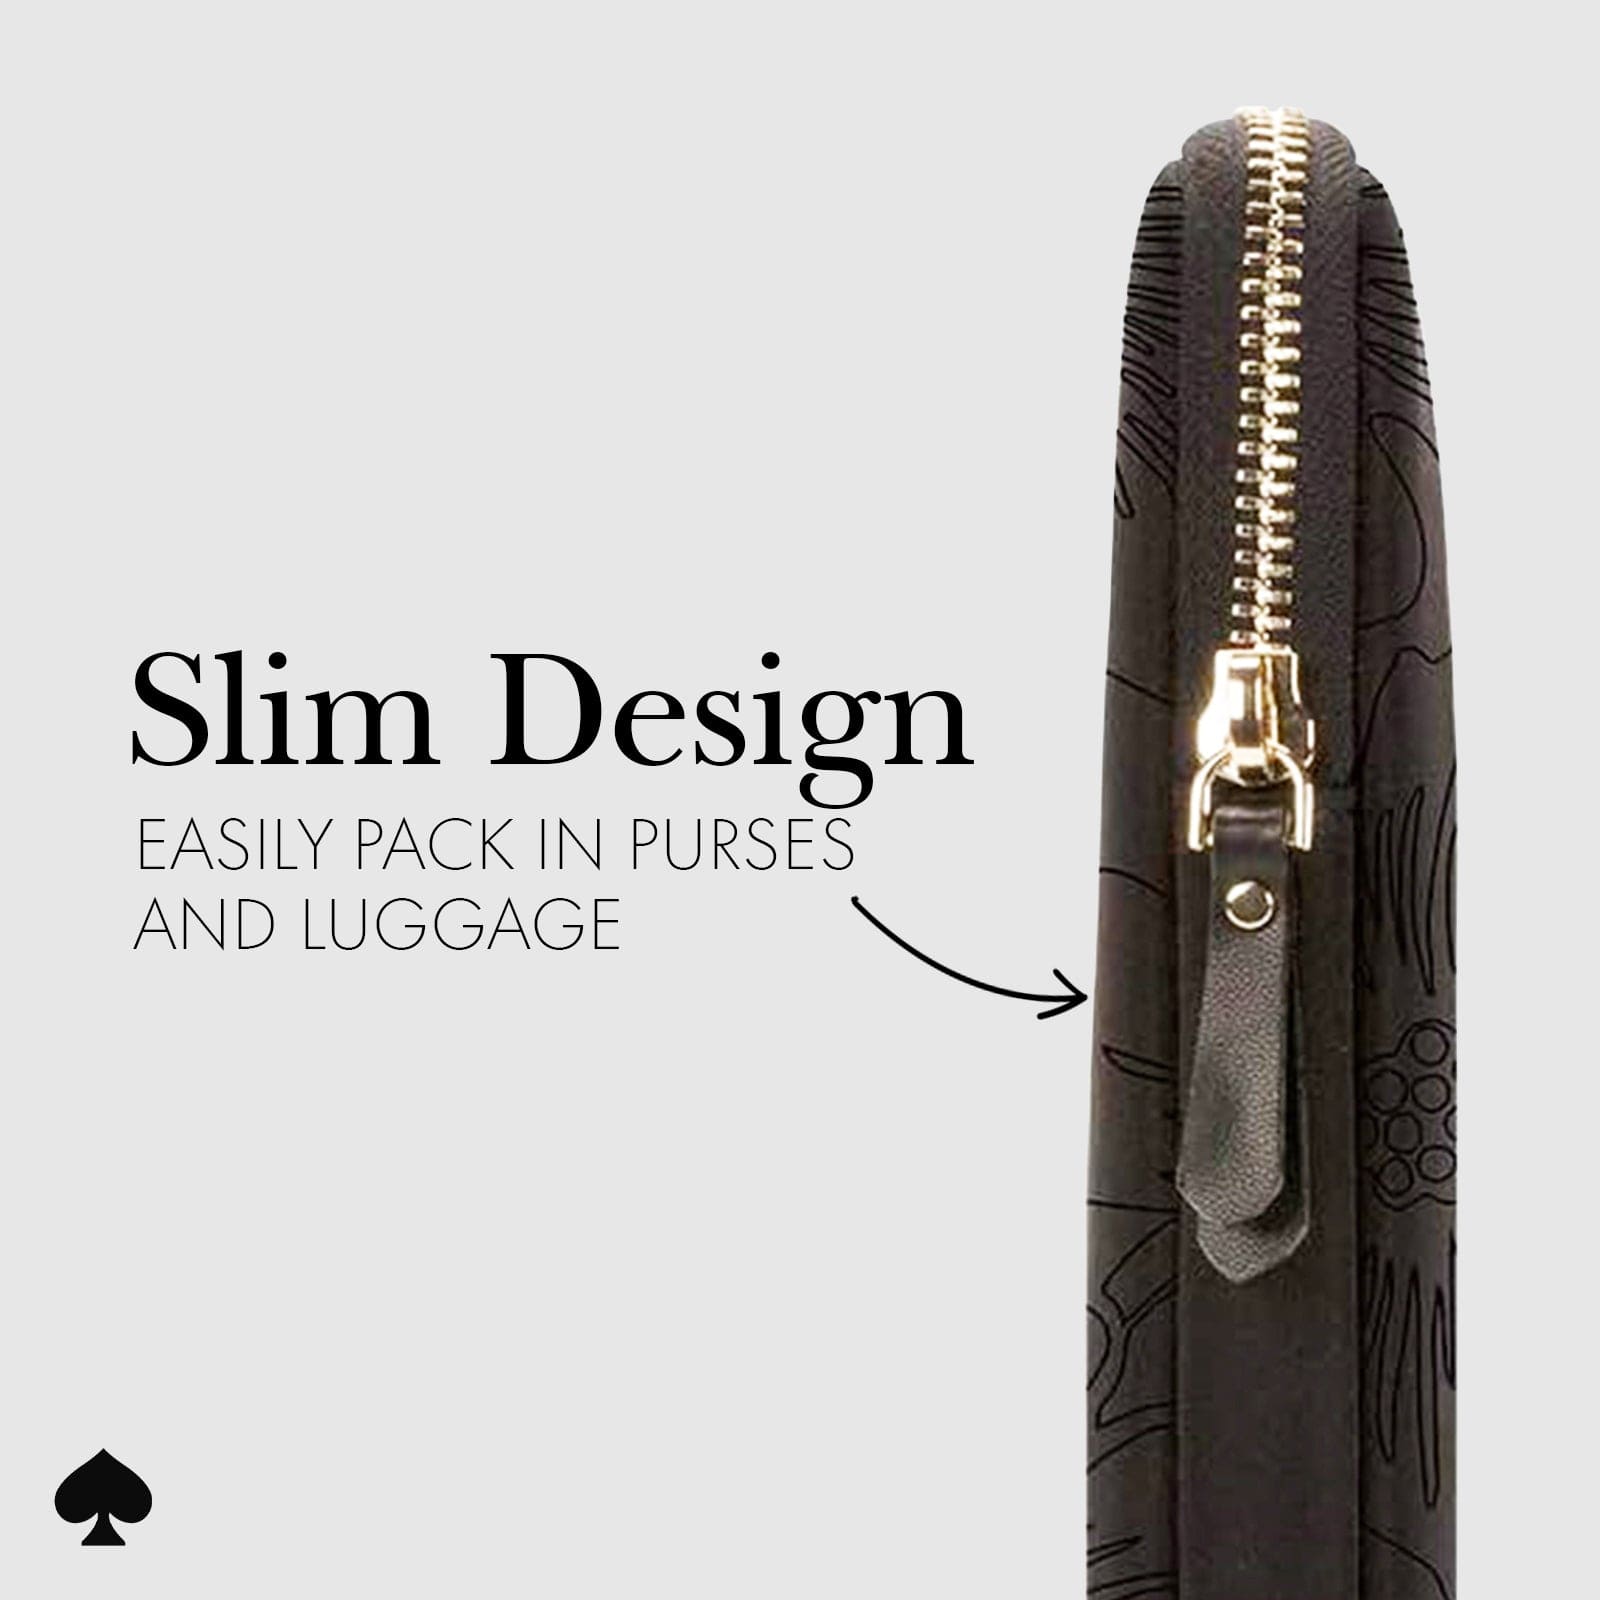 SLIM DESIGN EASILY PACK IN PURSES AND LUGGAGE